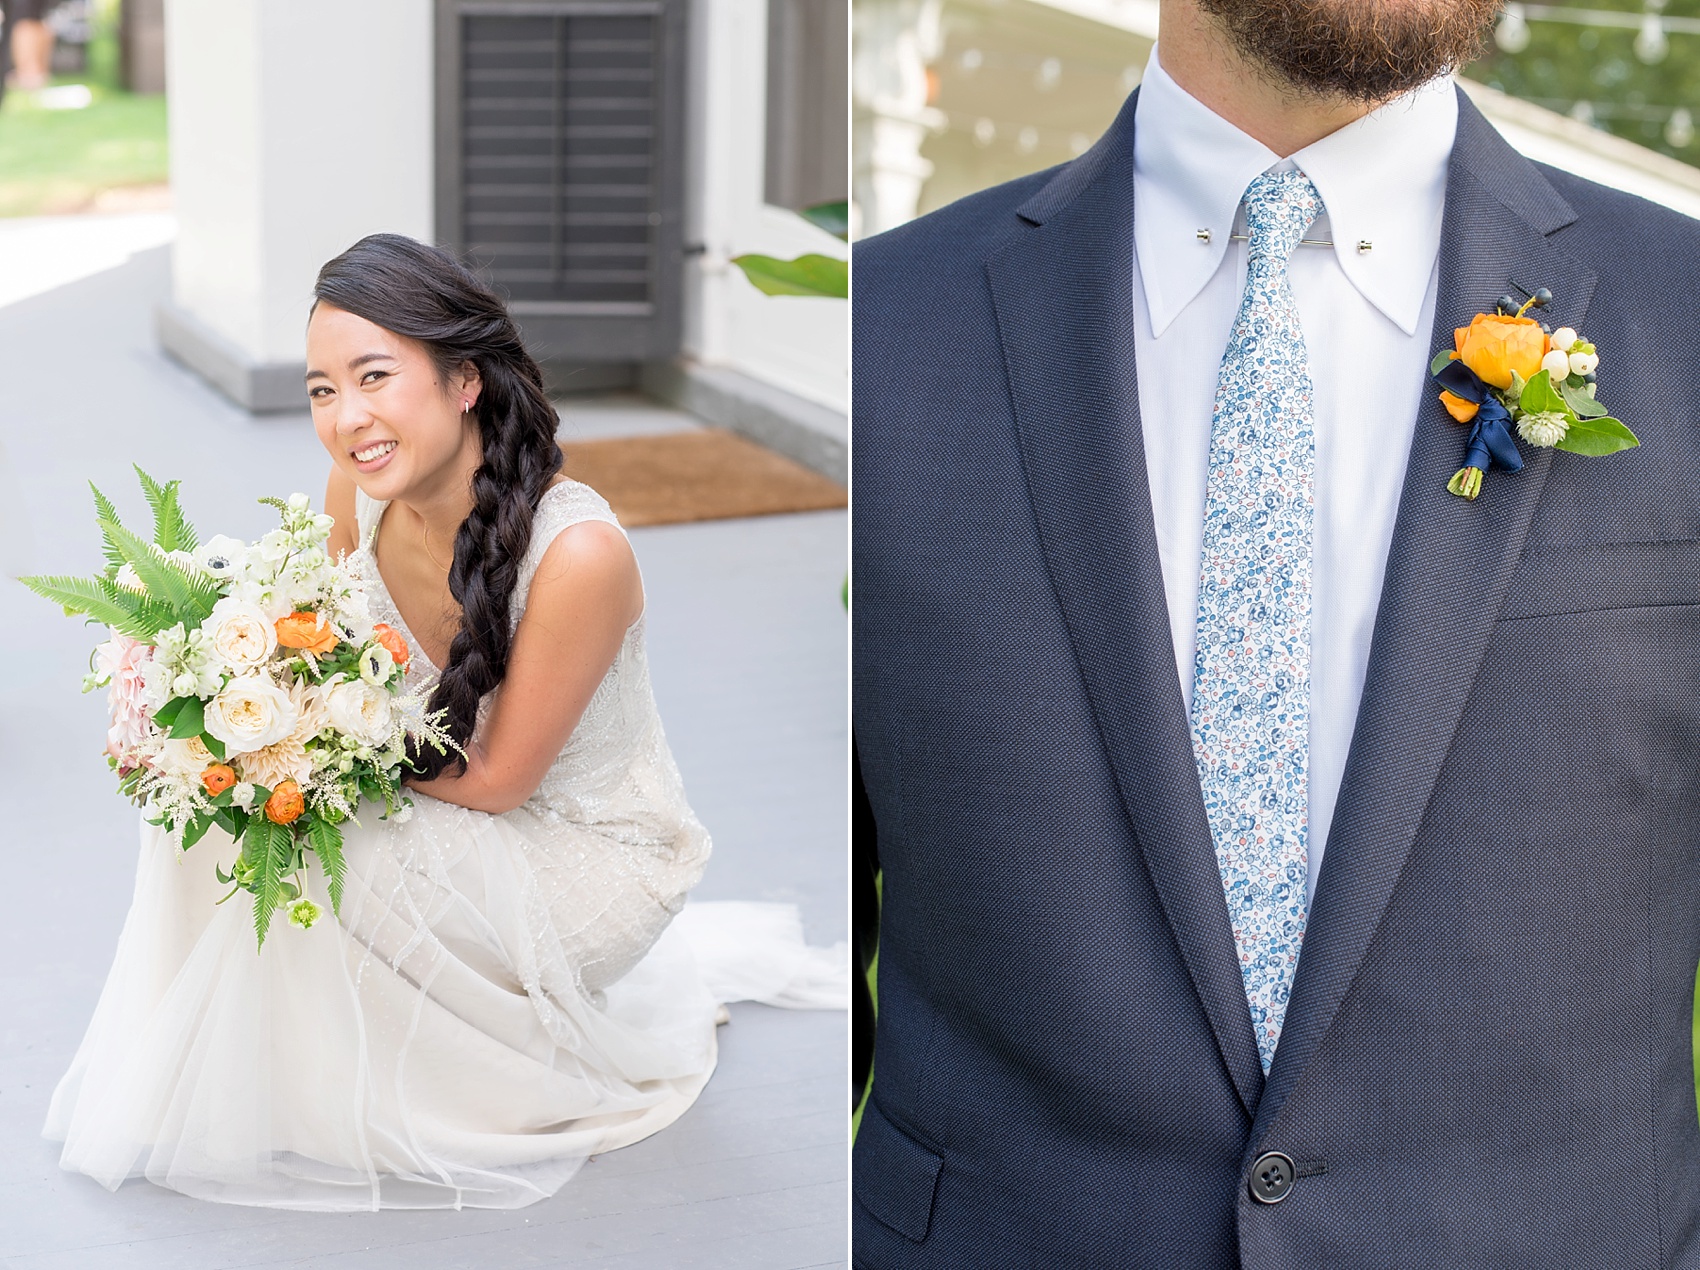 Orange flowers and floral tie at a NY wedding at Southwood Estate. Images by Mikkel Paige Photography, NYC wedding photographer.